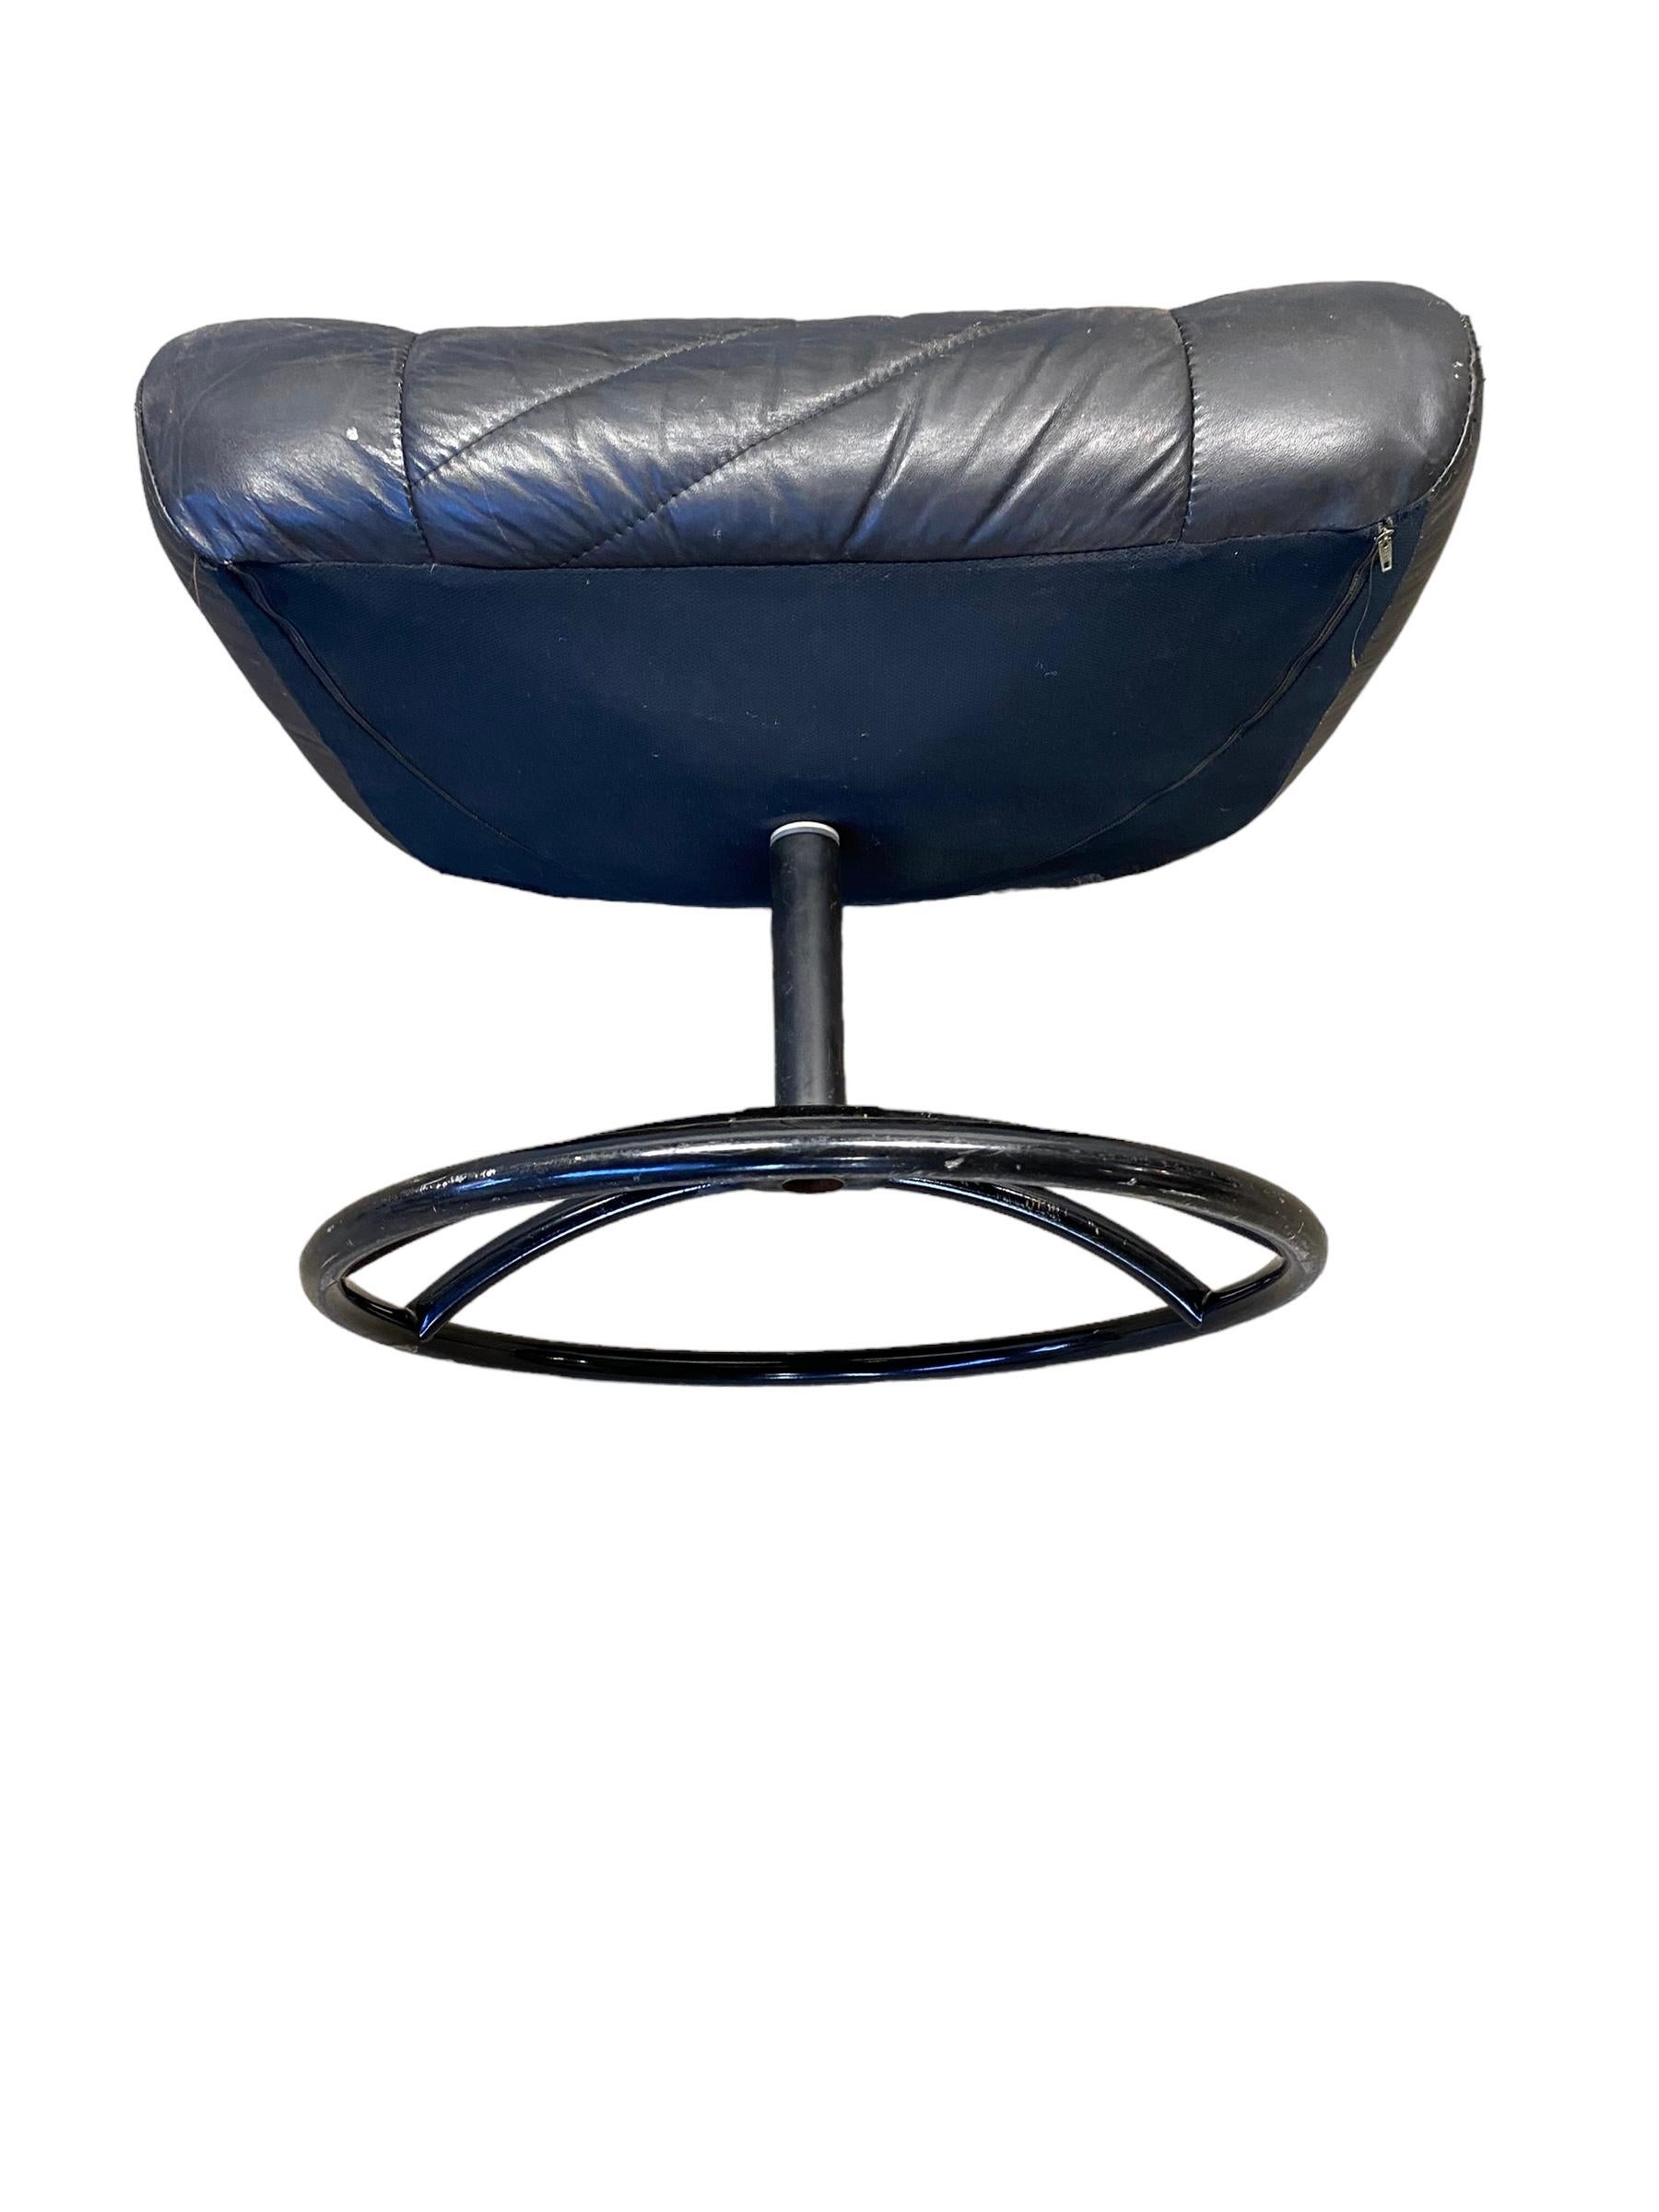 20th Century Ekornes Stressless Ottoman in Black Leather For Sale